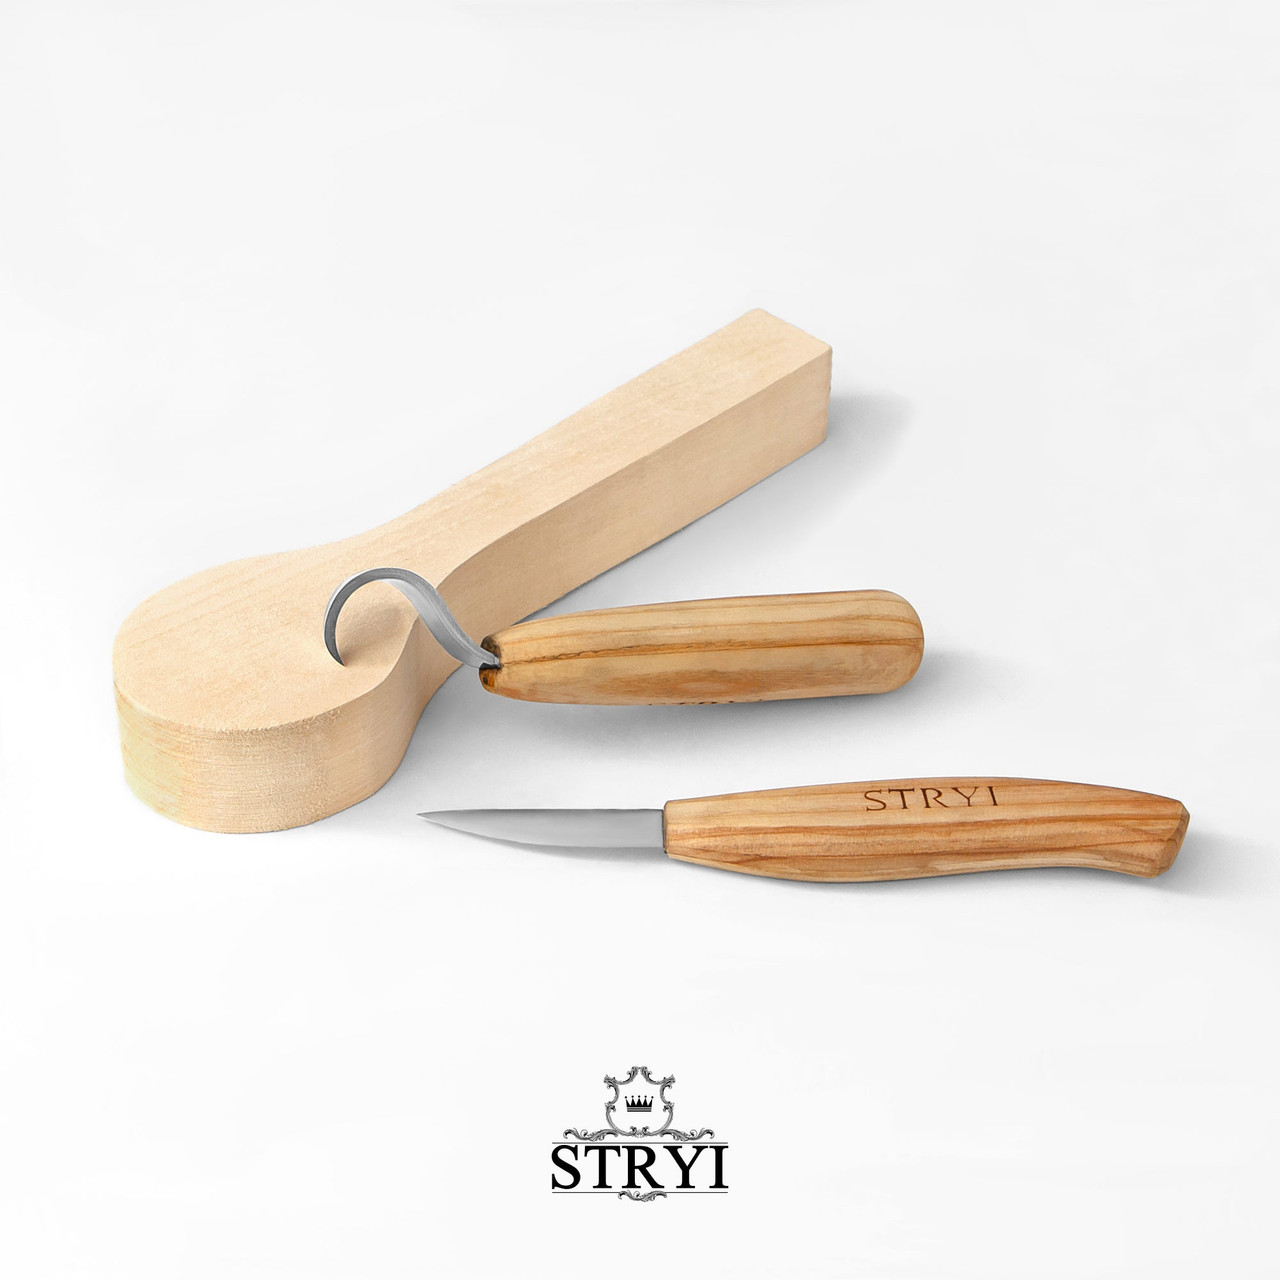 The individual spoon carving tools are included in the Stryi Spoon Carver's 2 Piece Beginner Set with the spoon cutout.  The tools show their short wood handles and steel cutting edges.